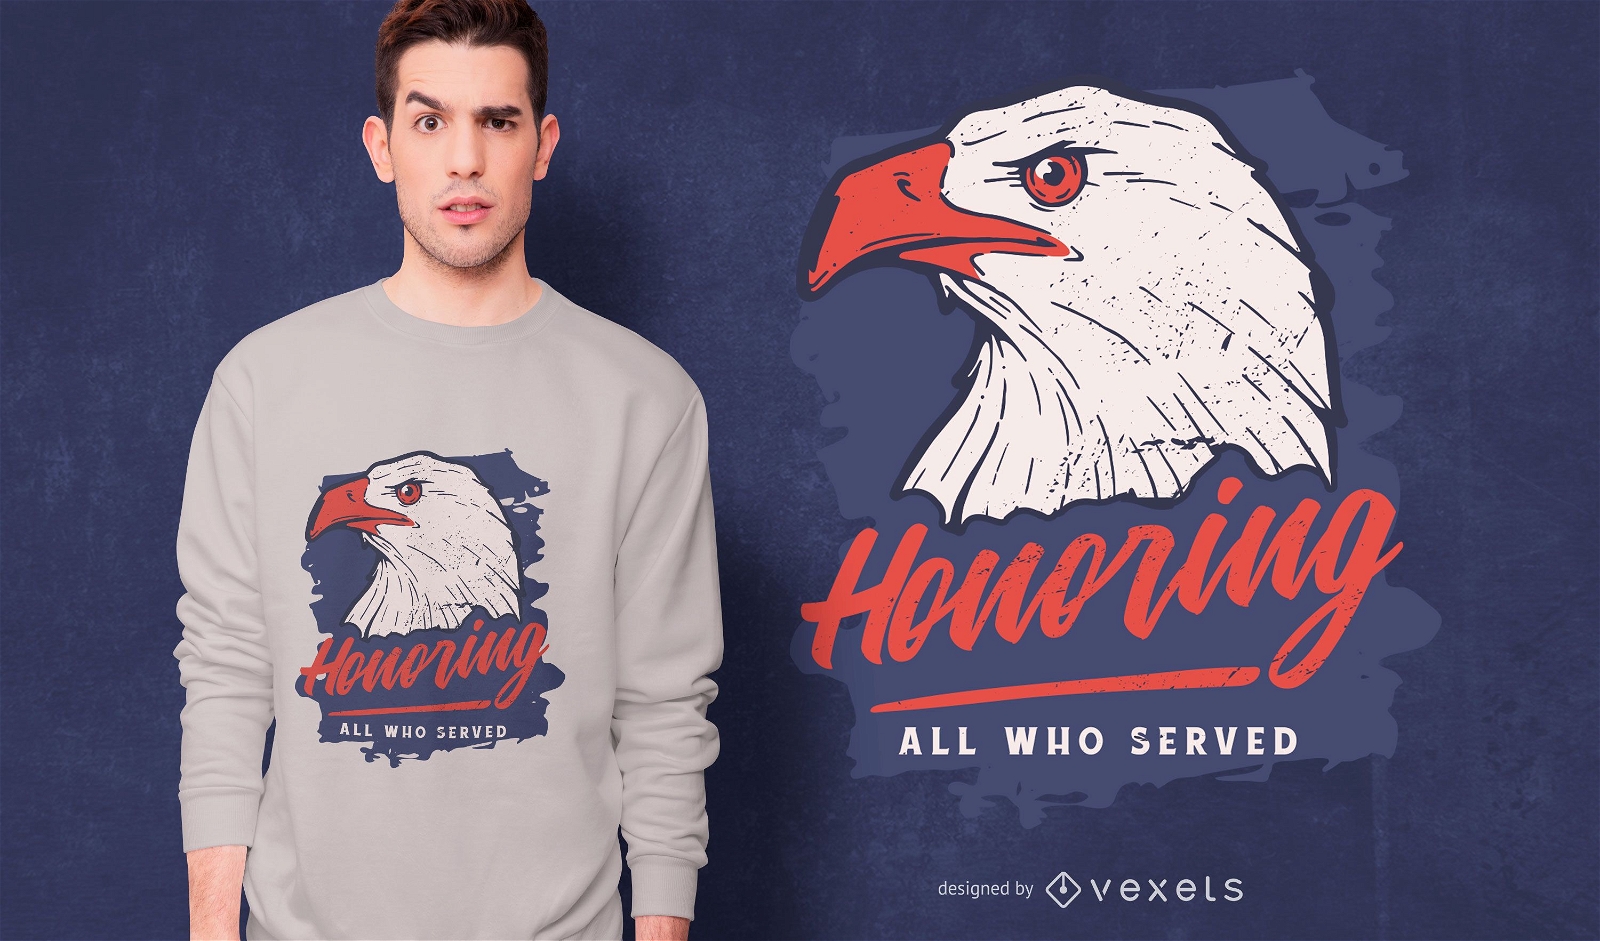 Honoring all who served t-shirt